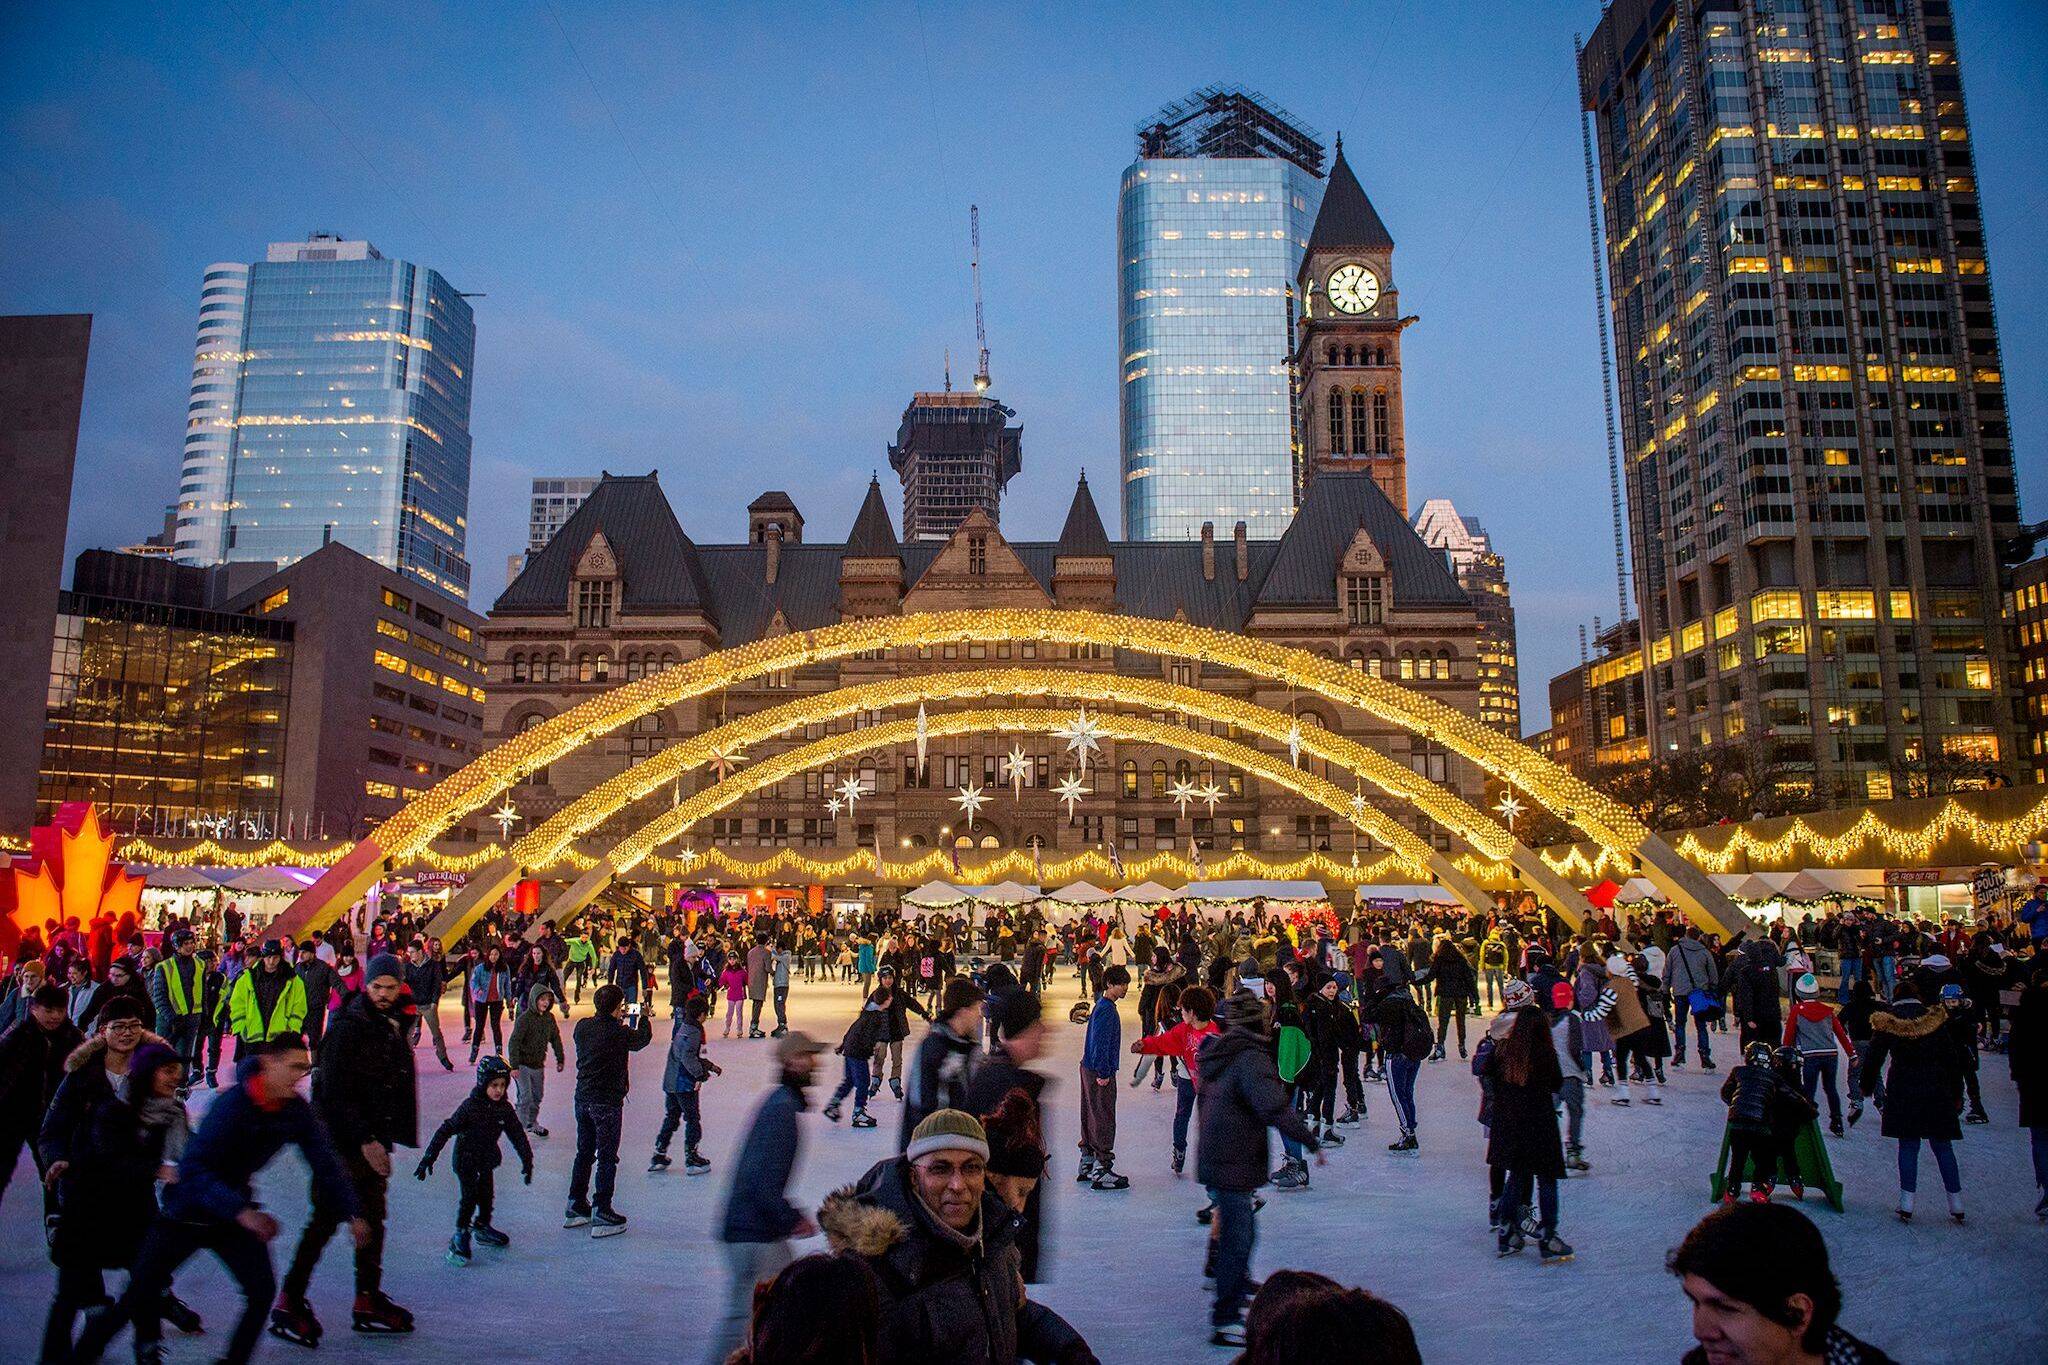 Toronto is getting a festive Christmas market and lights display